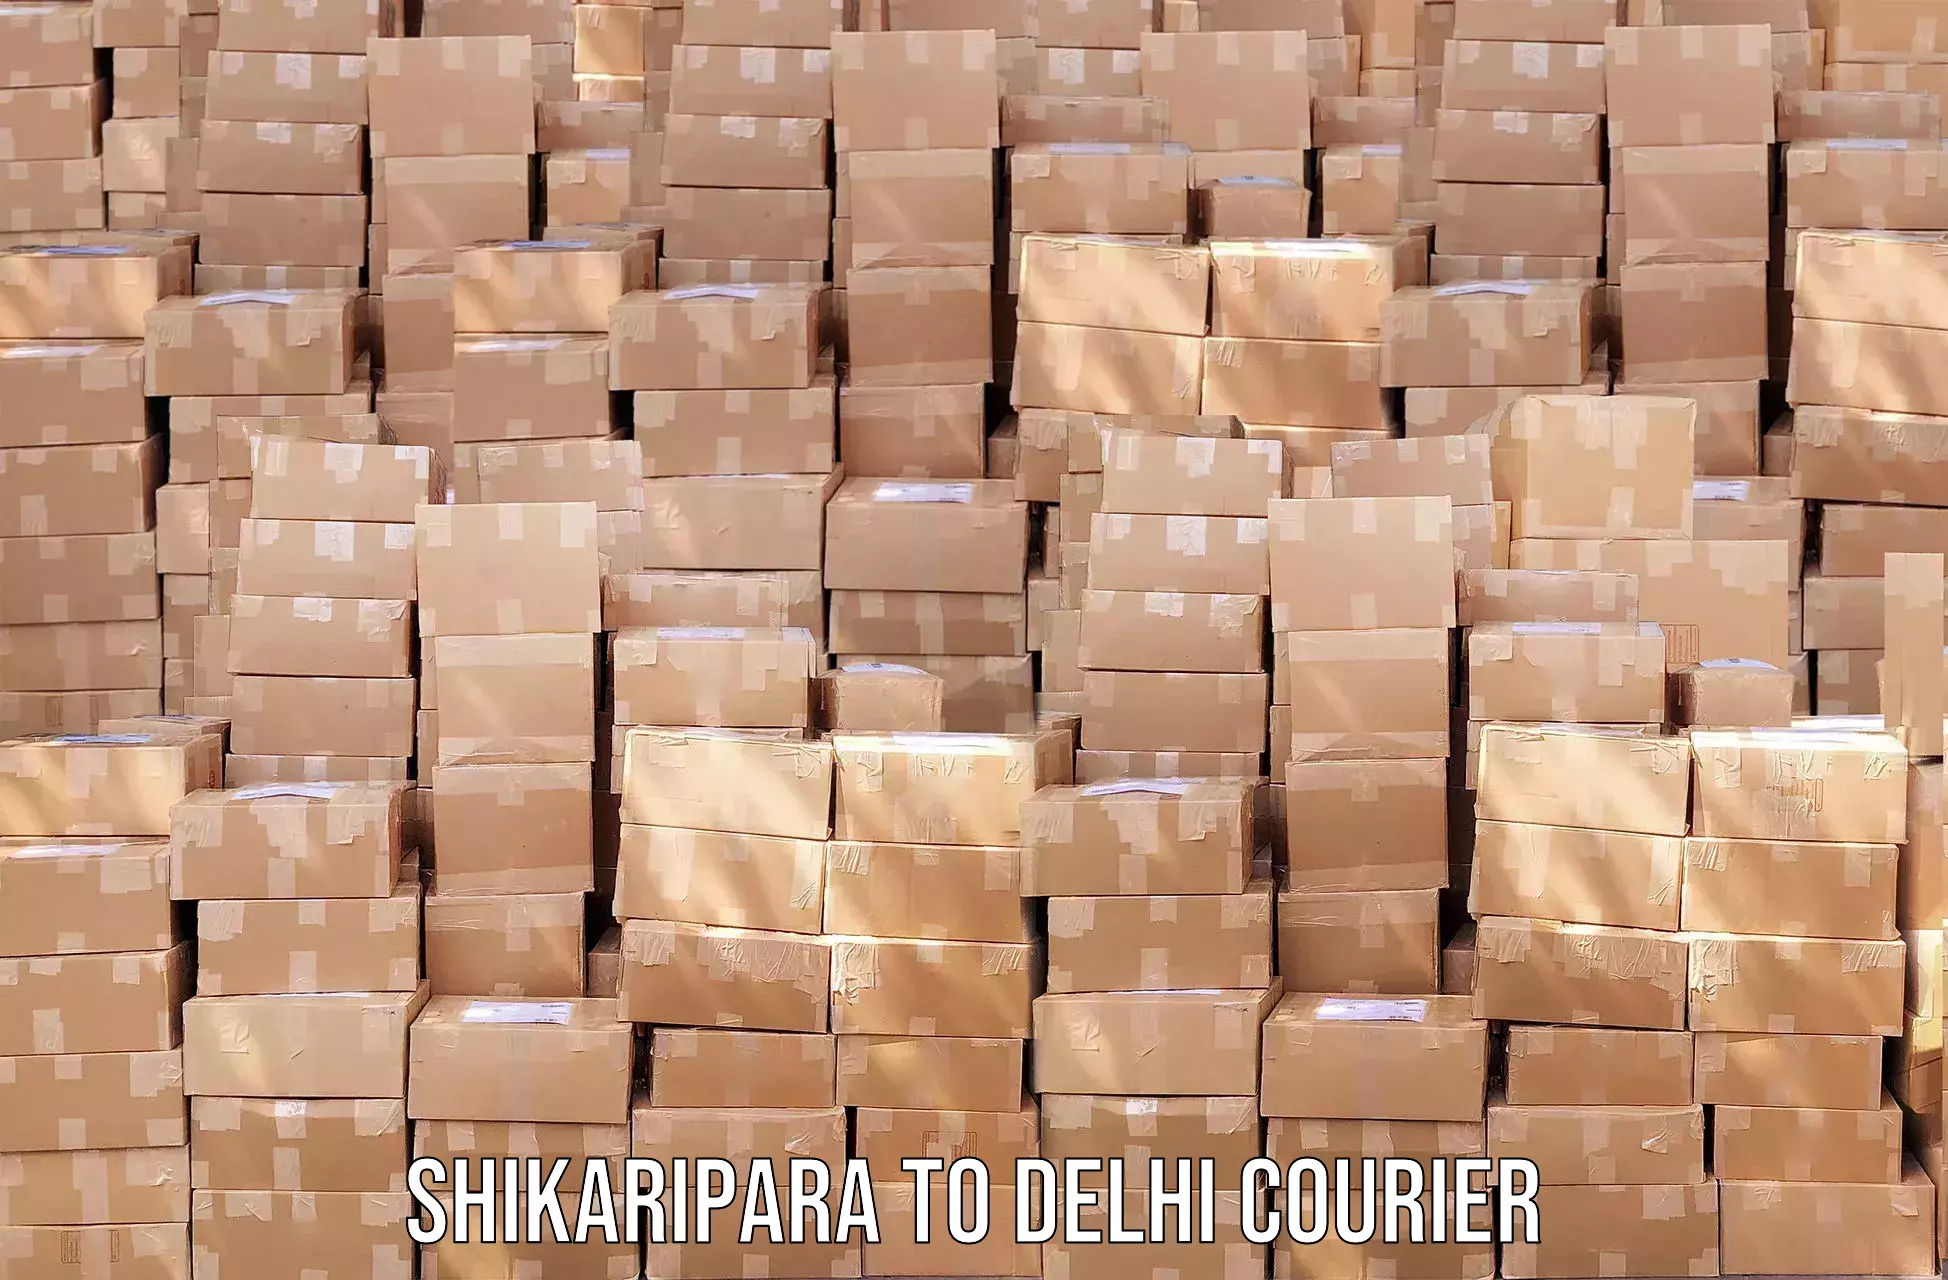 Cargo delivery service Shikaripara to Jhilmil